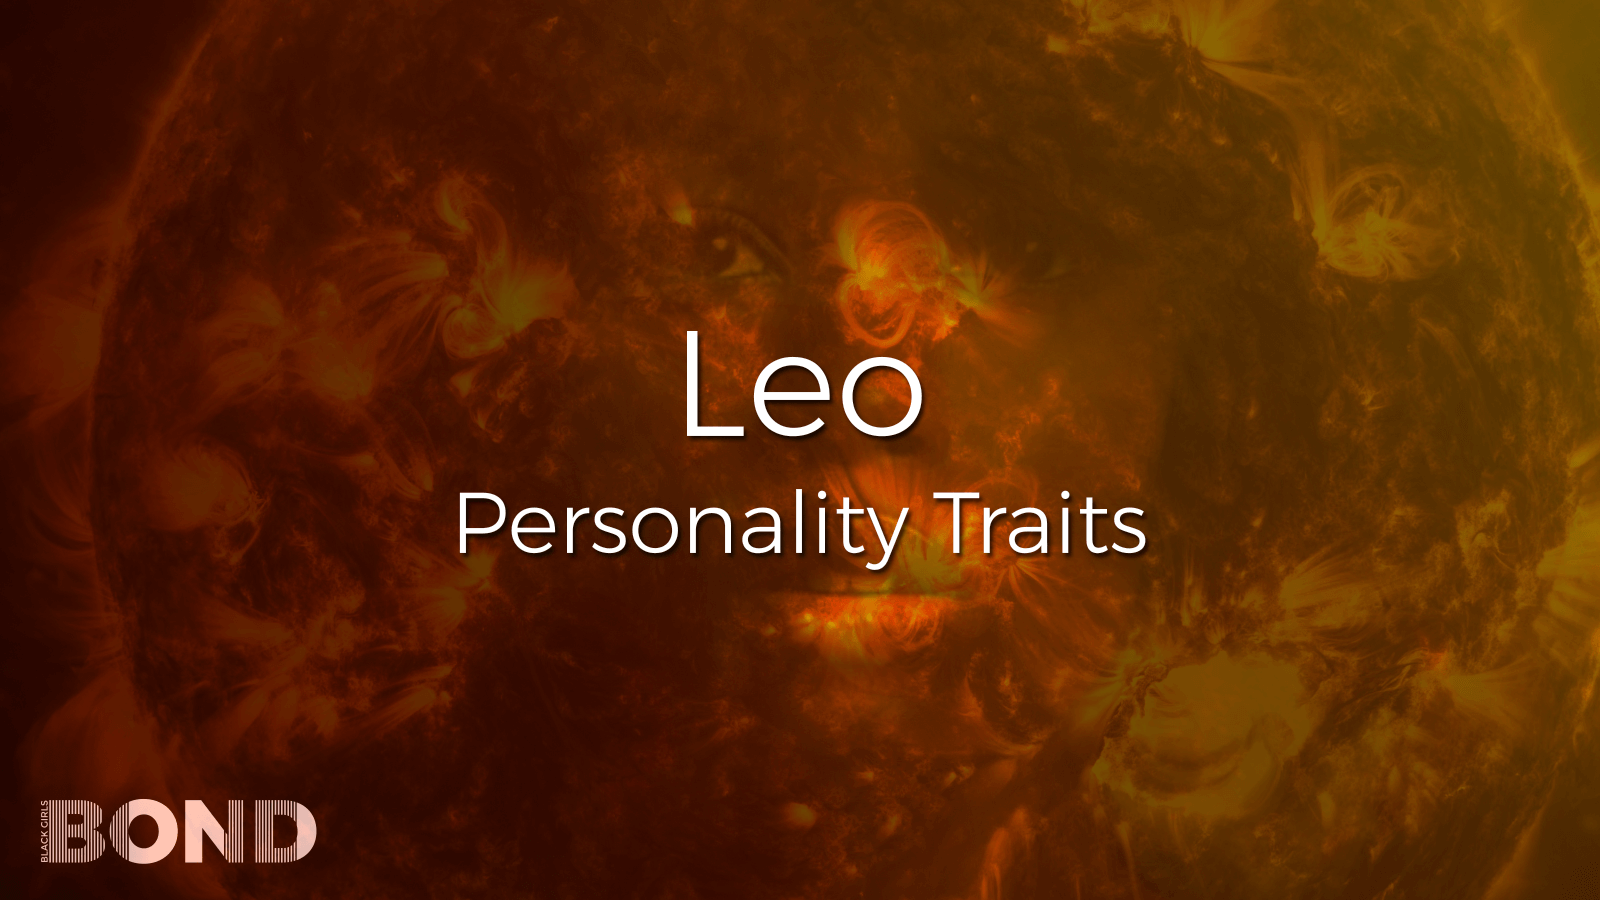 Leo Zodiac Sign: Personality Traits, Compatibility, Love, Relationships and More